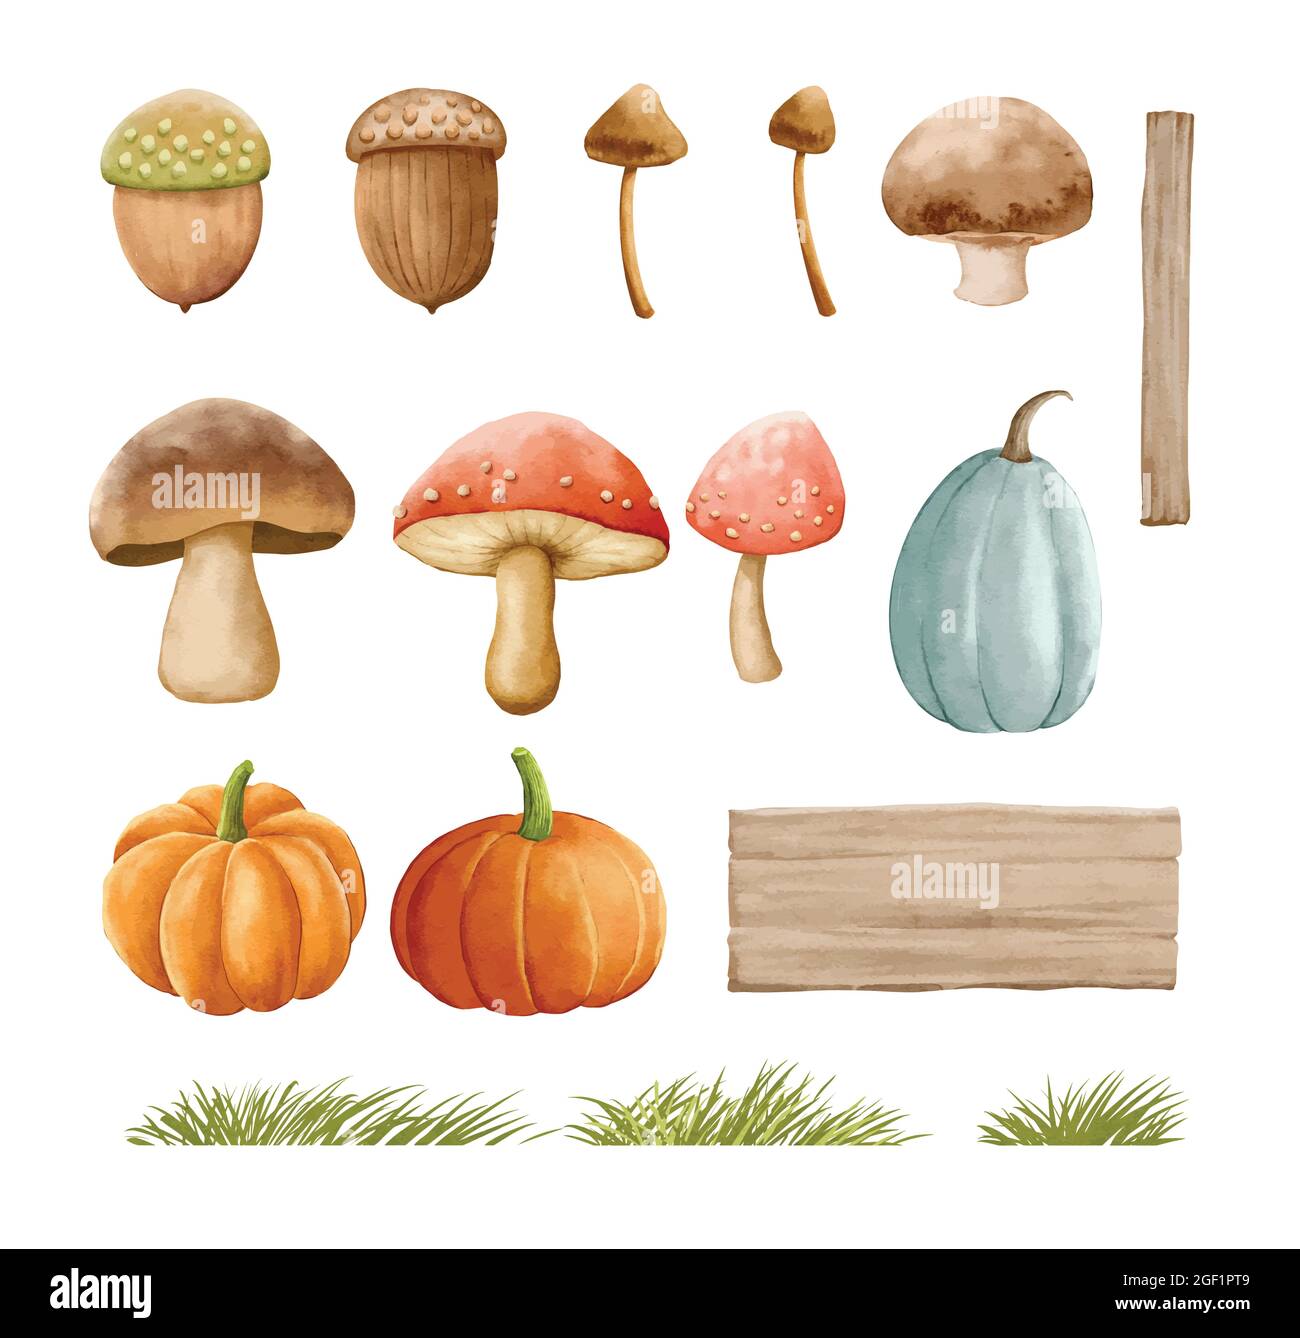 Mushrooms autumn set with grass in watercolor painting style. Mushrooms isolated on a white background. Stock Vector